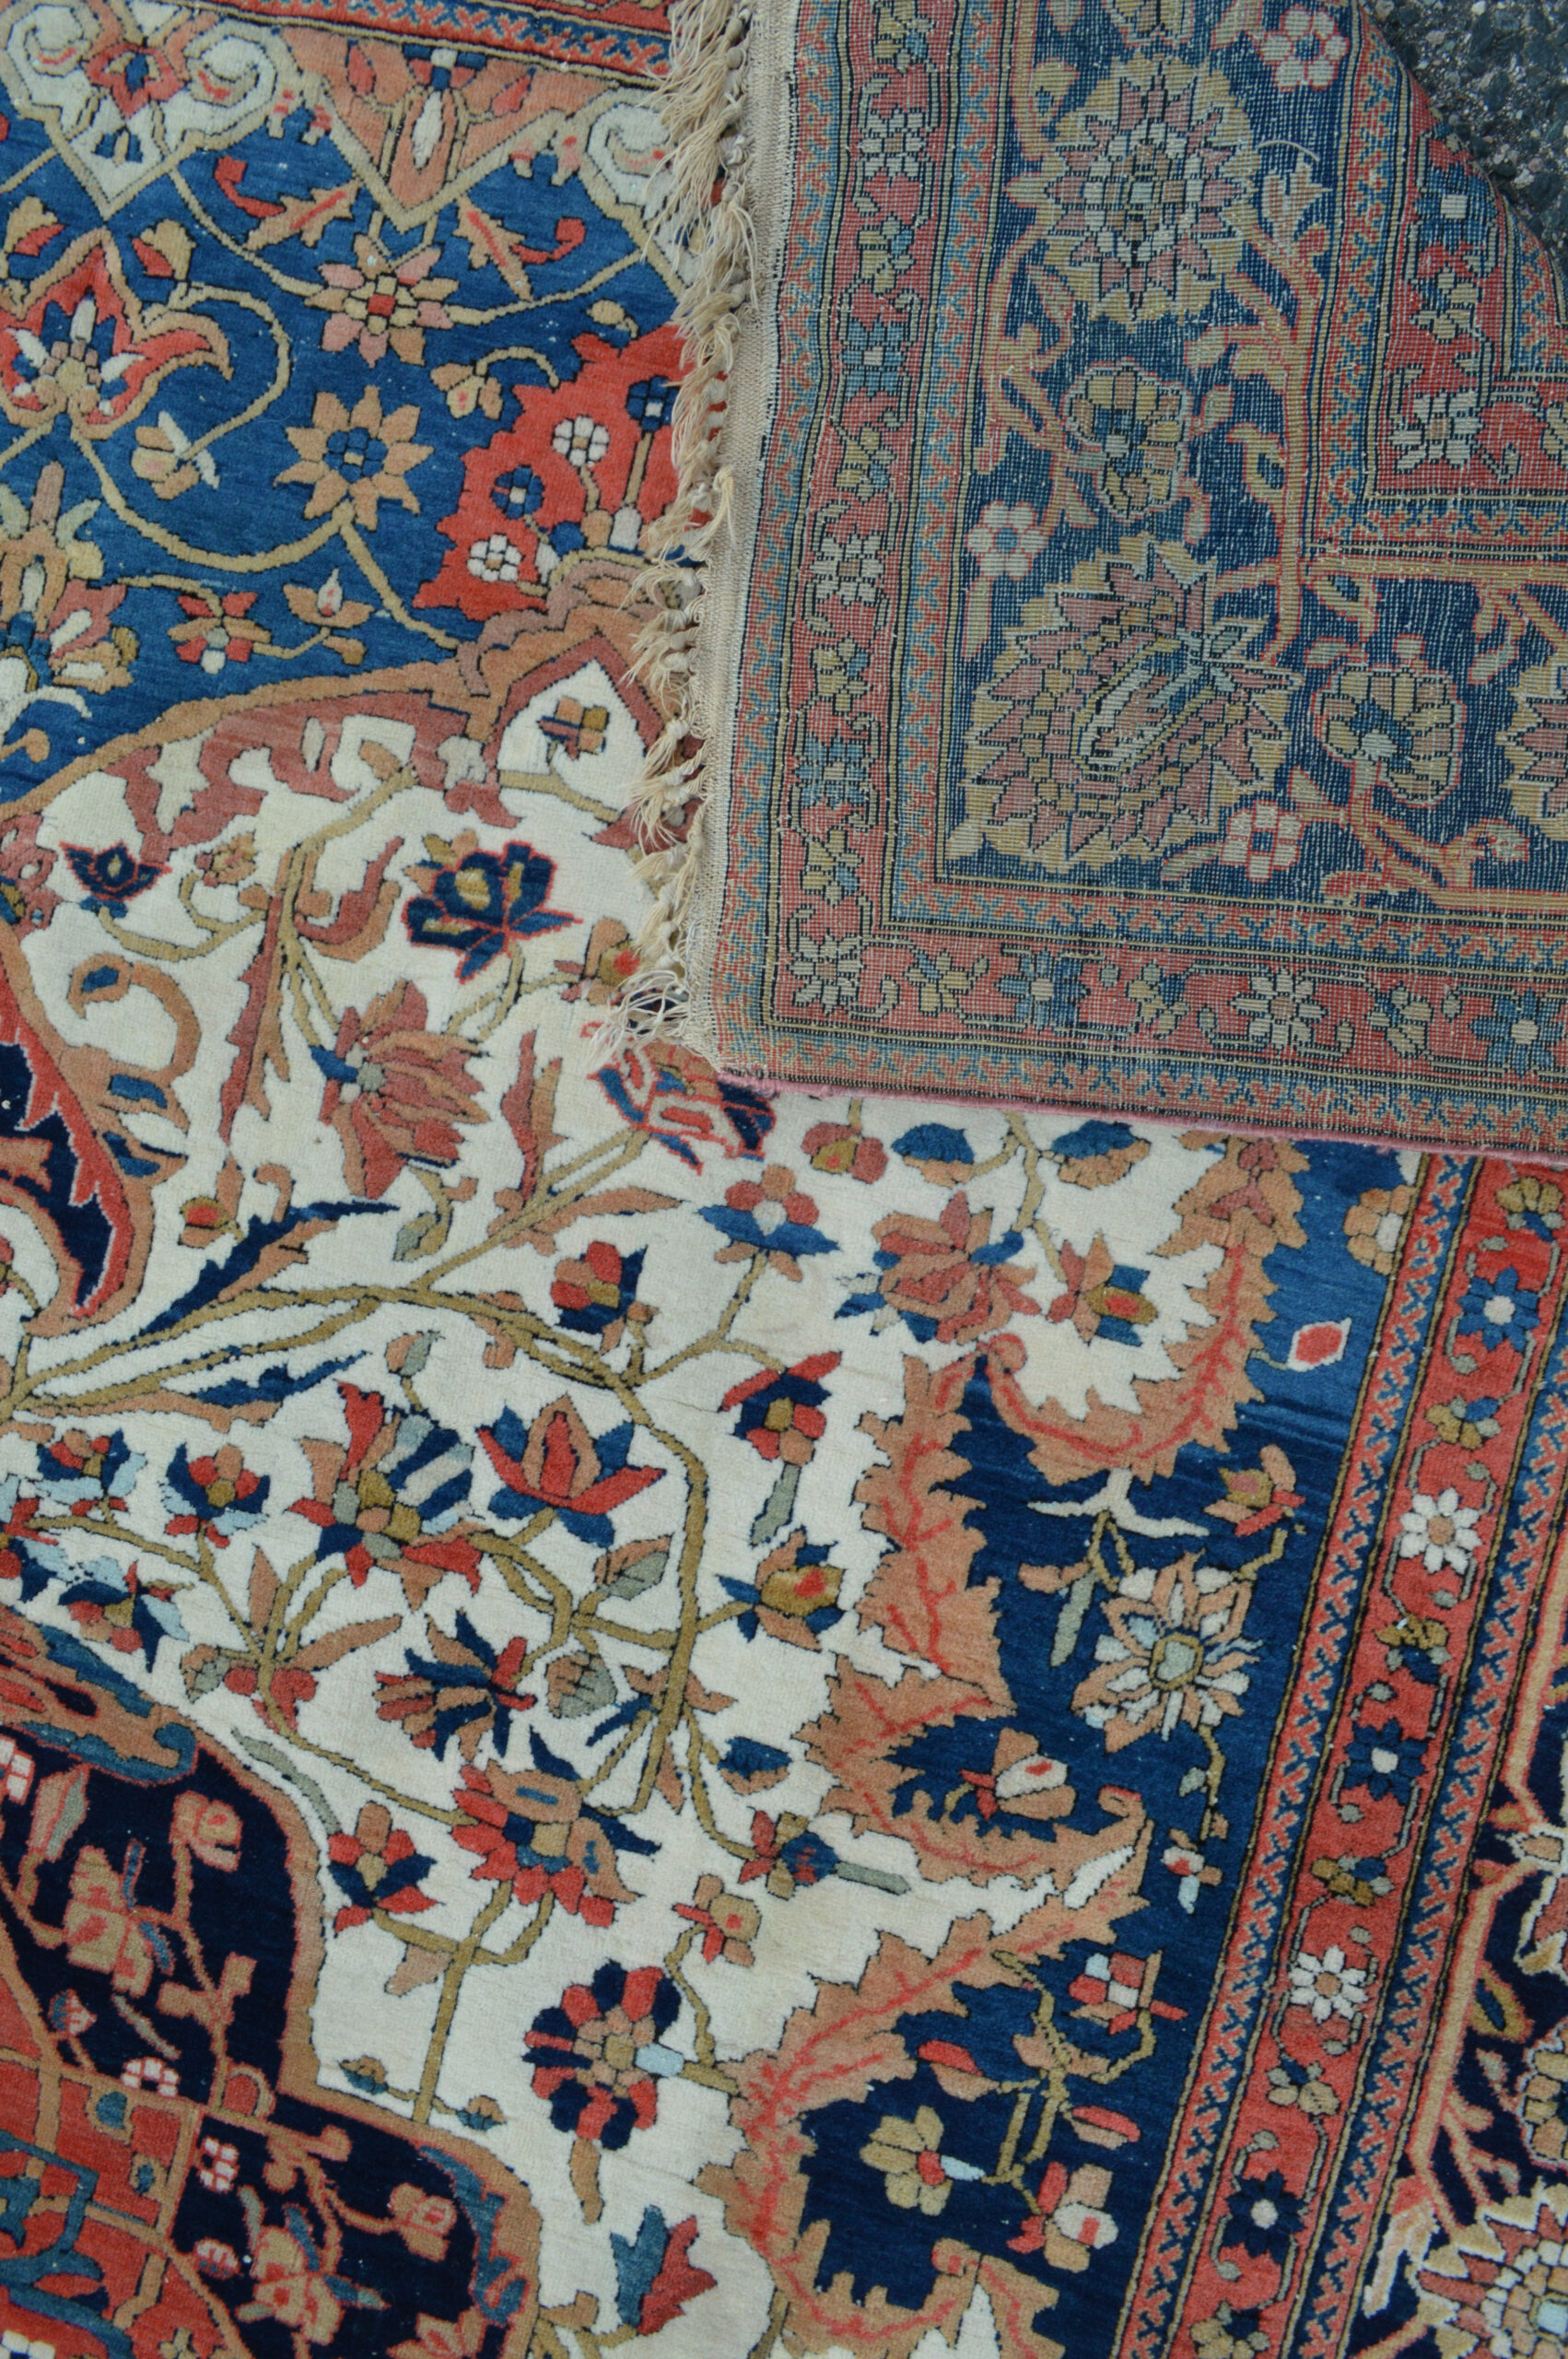 Weave detail from a 19th century antique Persian Mohtasham Kashan rug. Douglas Stock Gallery specializes in antique Mohtasham Kashan rugs and room size Mohtasham Kashan carpets. Antique rugs Boston,MA area